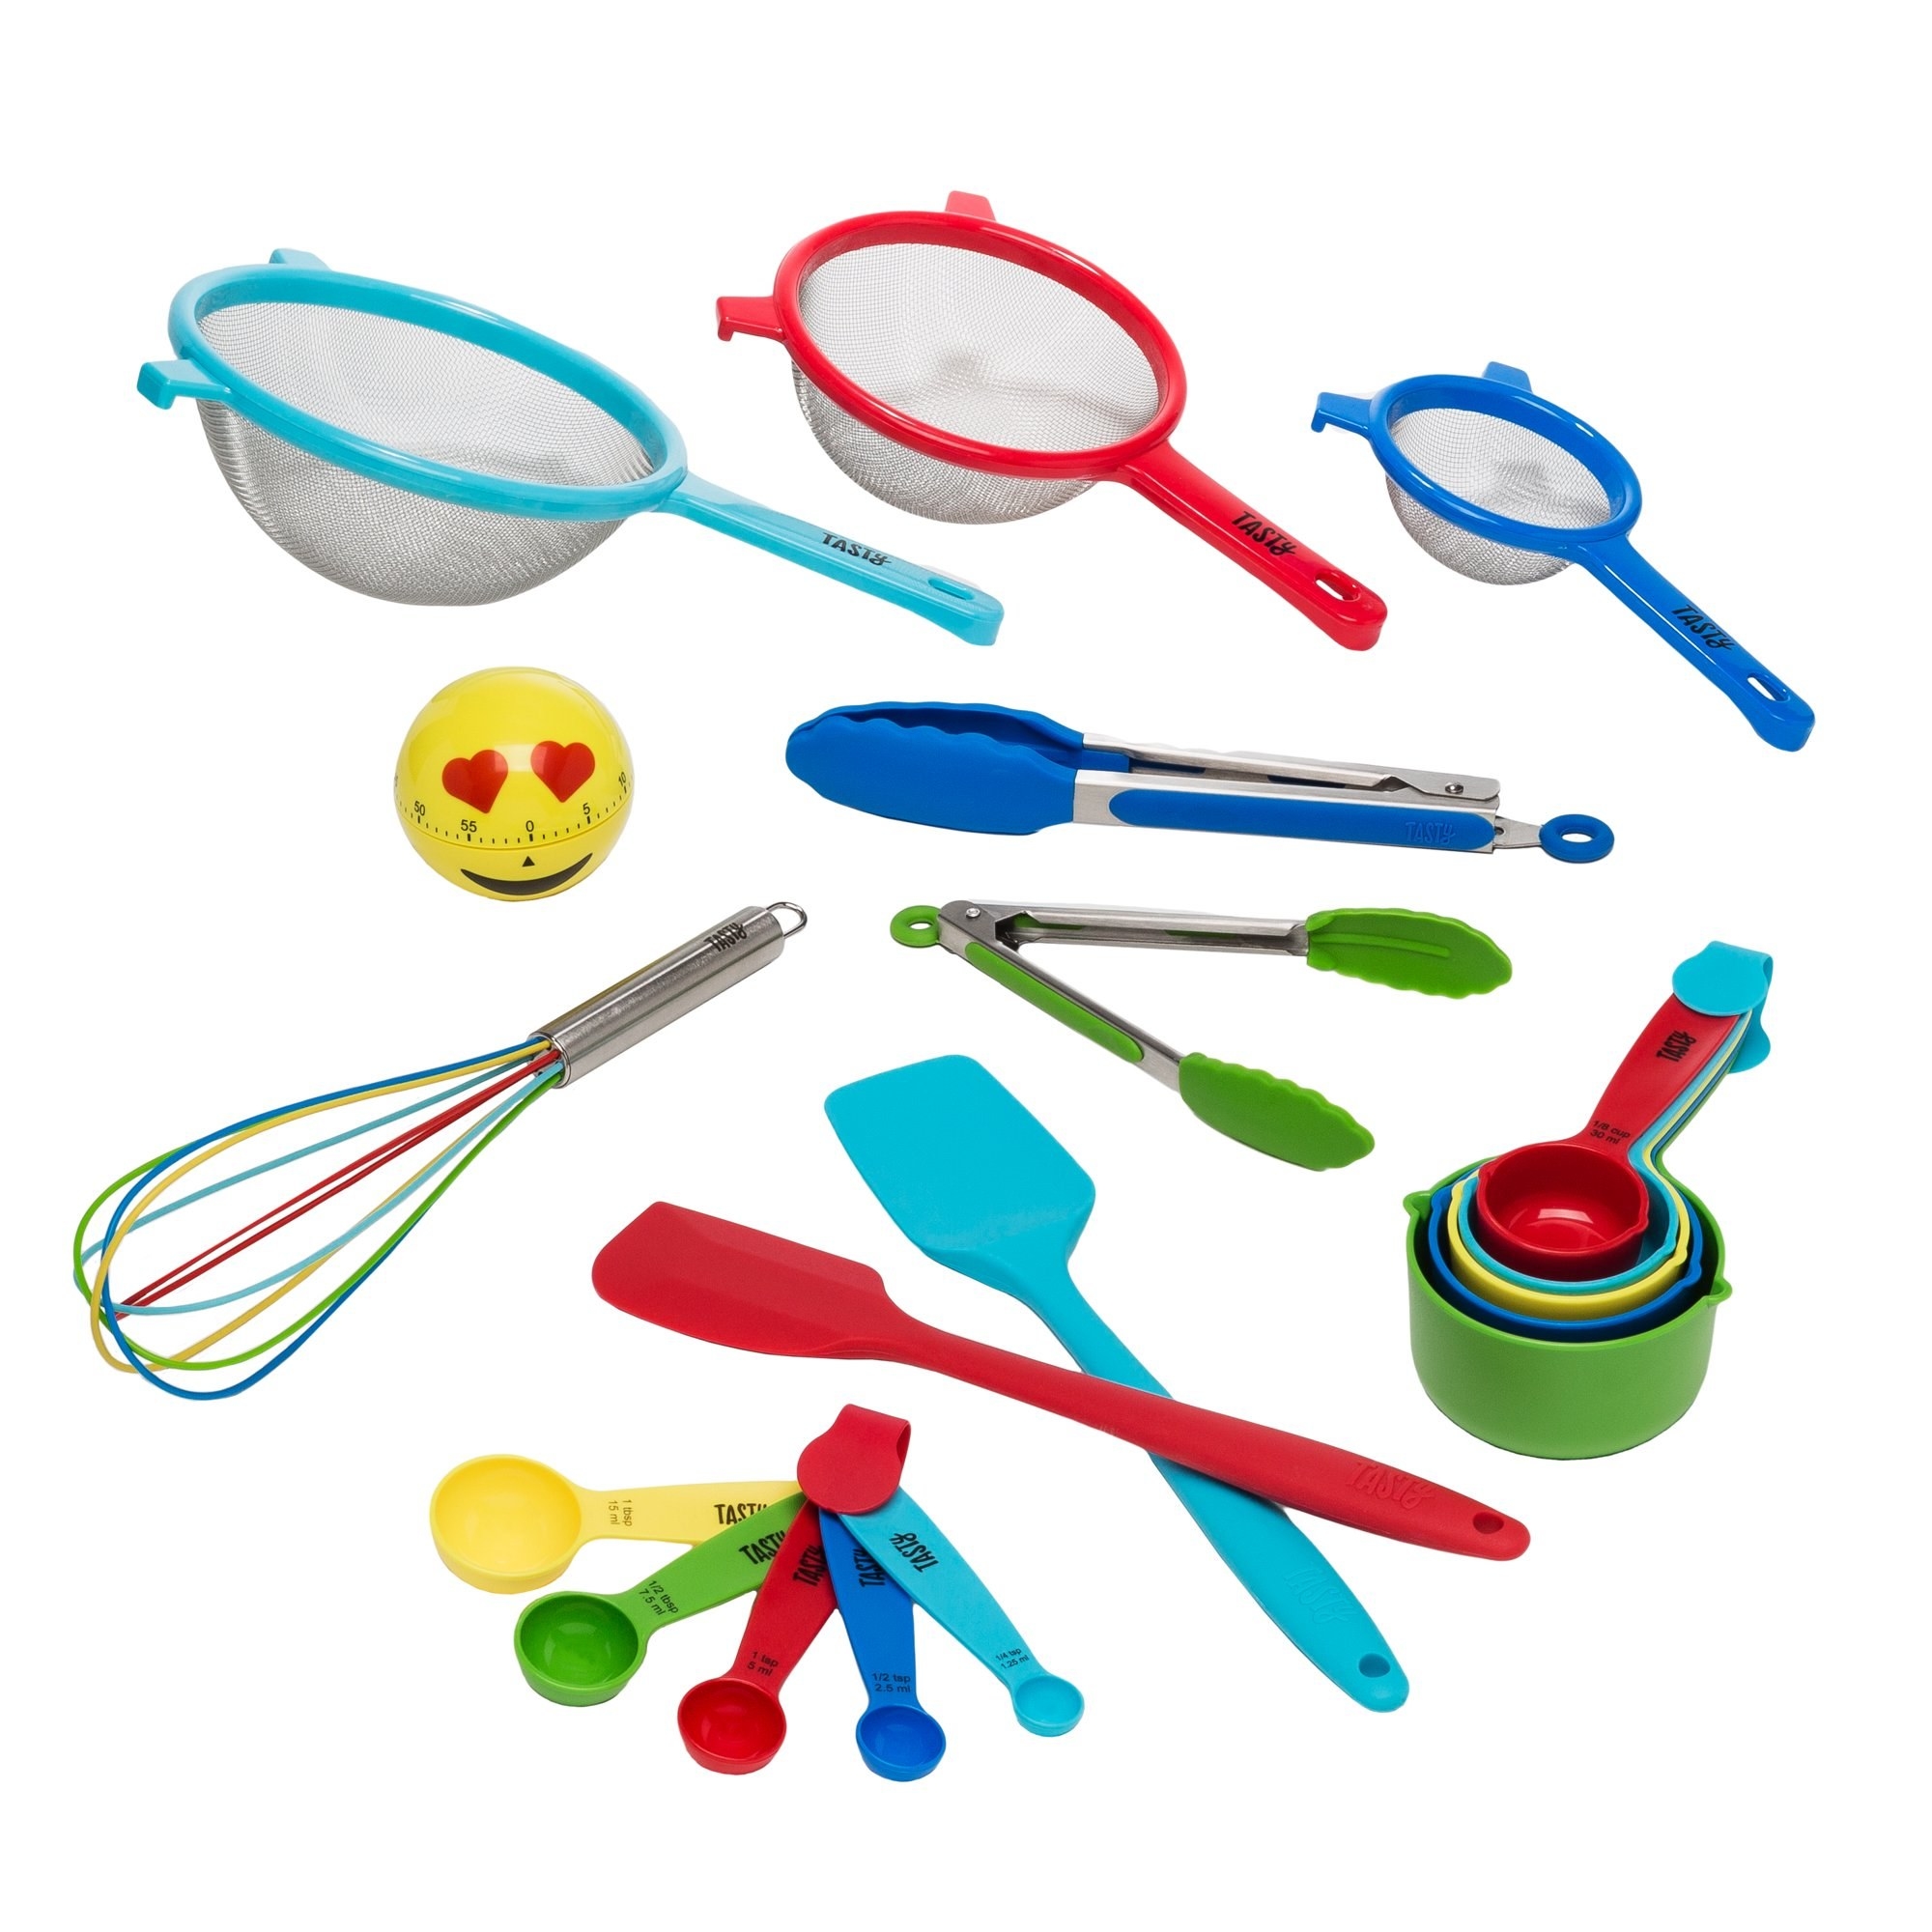 Three strainers of varying colors and sizes, a heart-eyes emoji timer, measuring spoons splayed out but connected at their handle, stacked measuring cups, one red spatula crossed over a second blue spatula, one whisk with multicolor prongs, two tongs